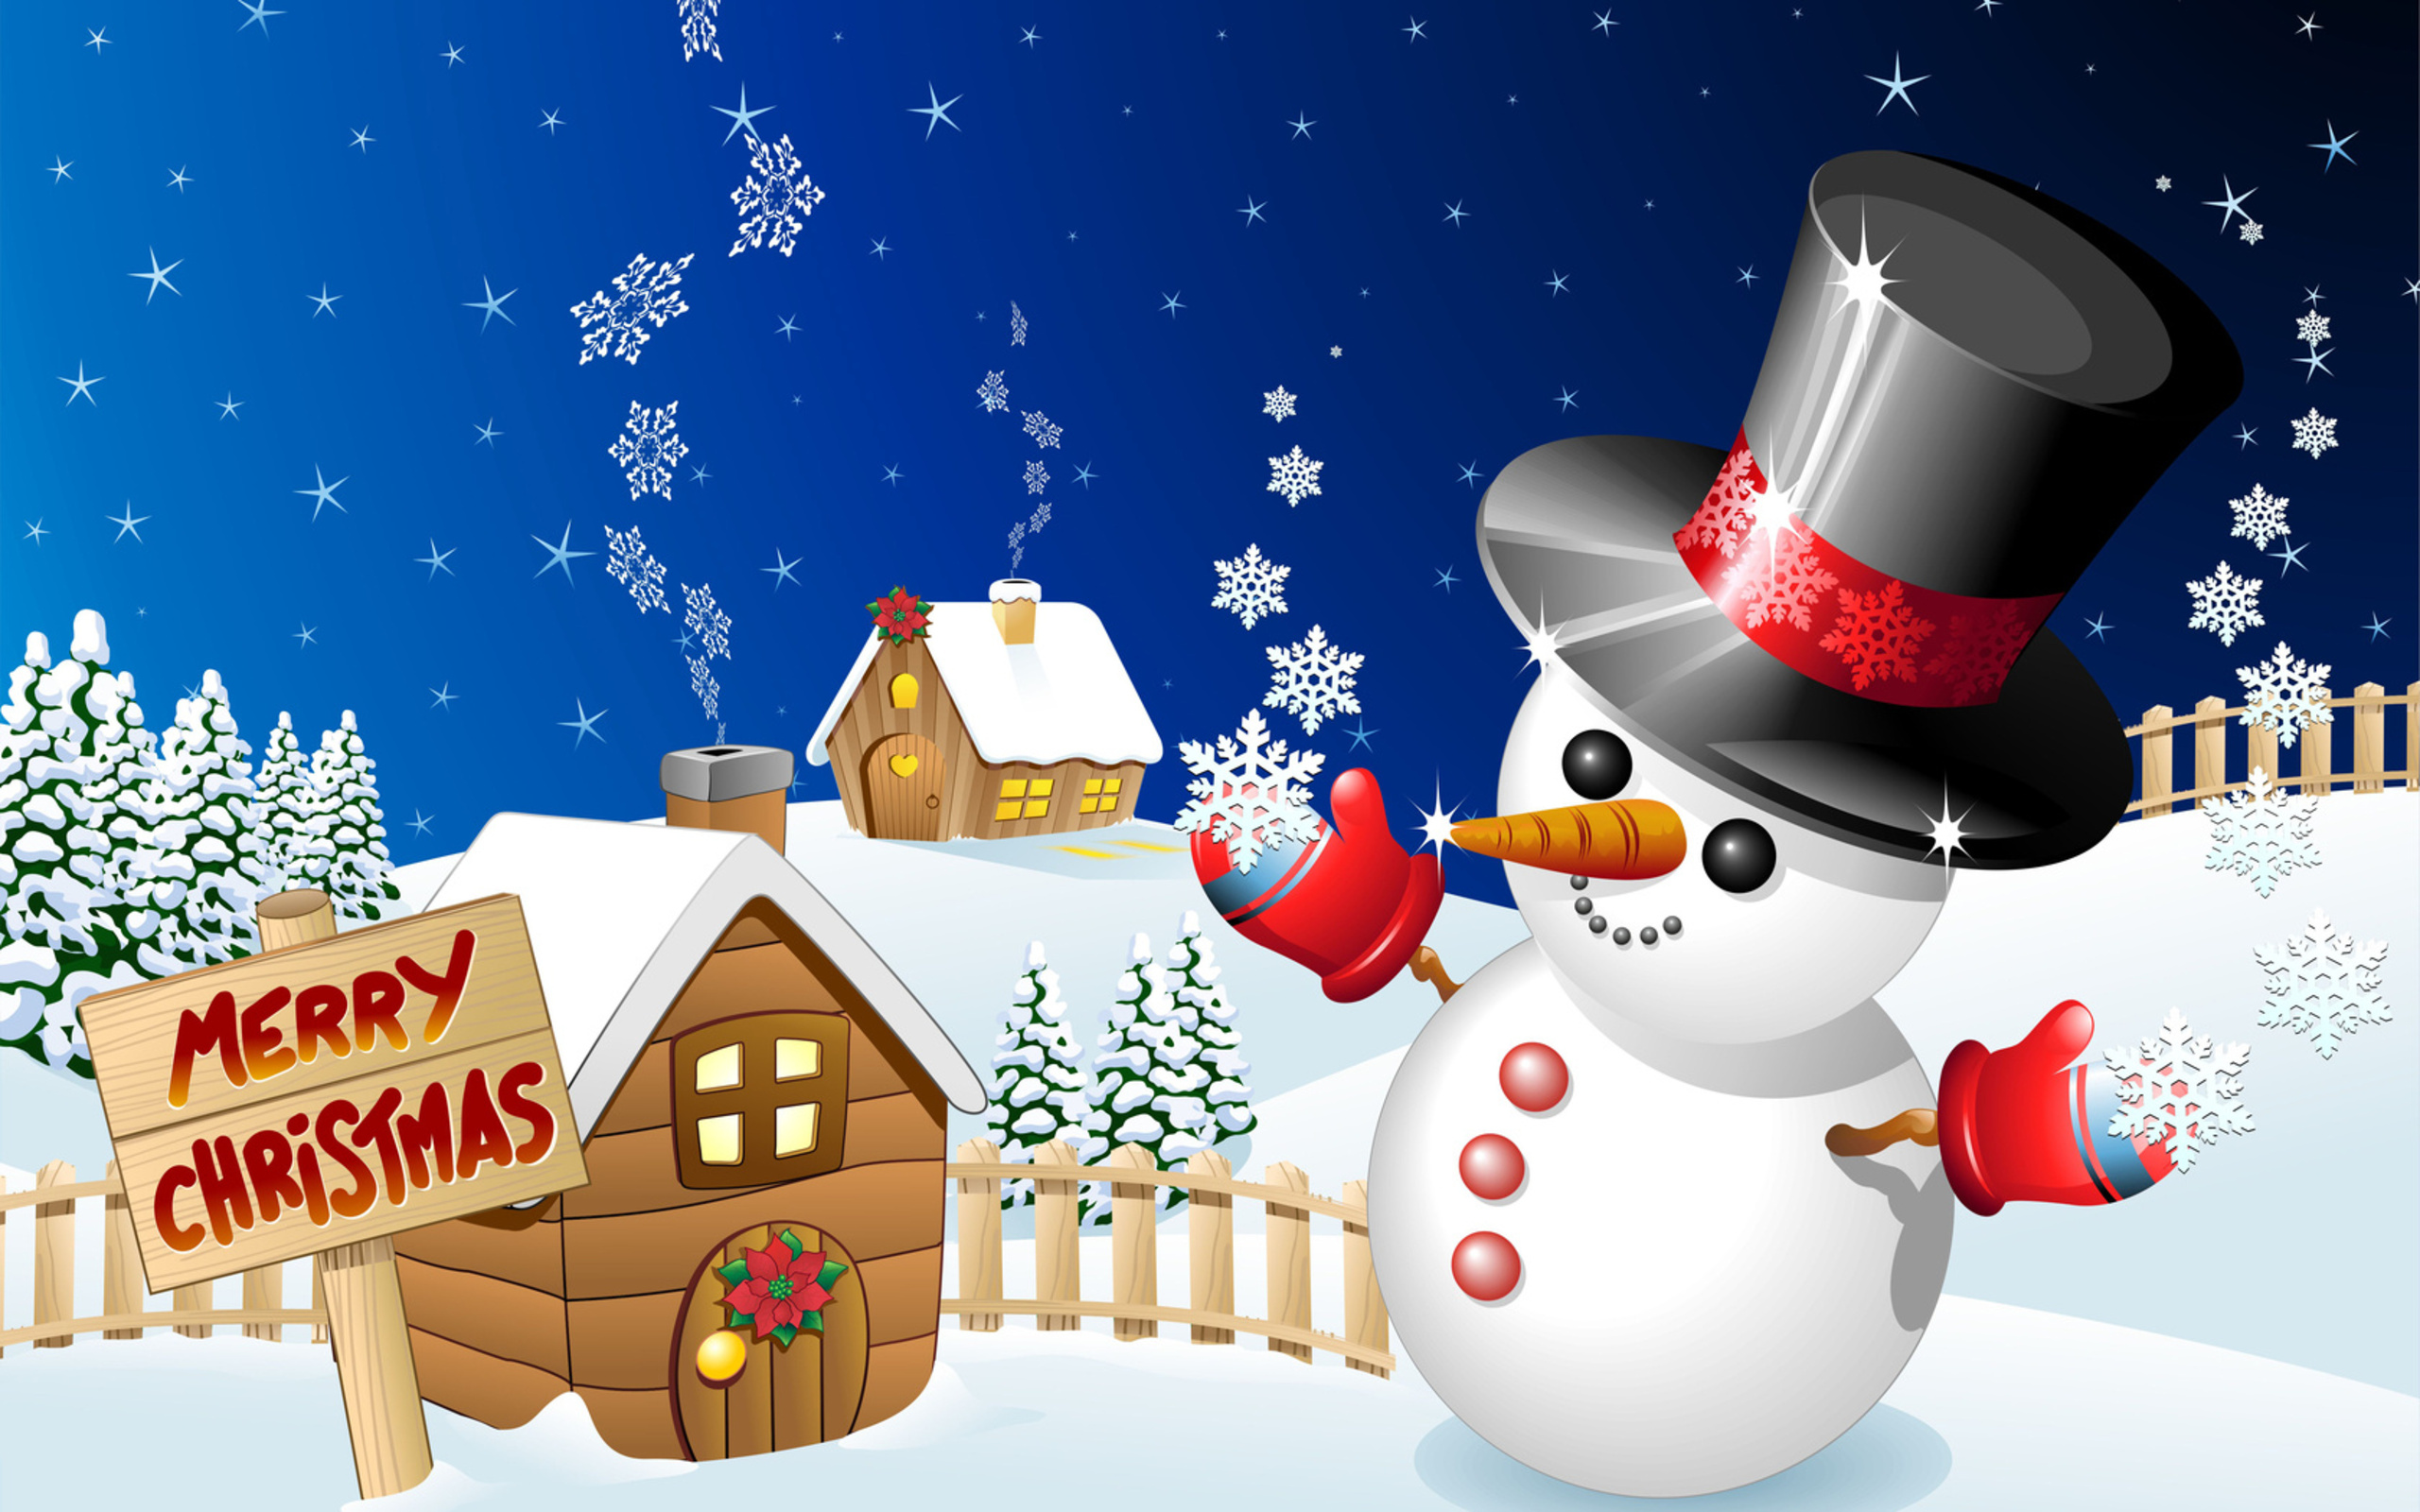 Wallpapers snowman wish buttons on the desktop